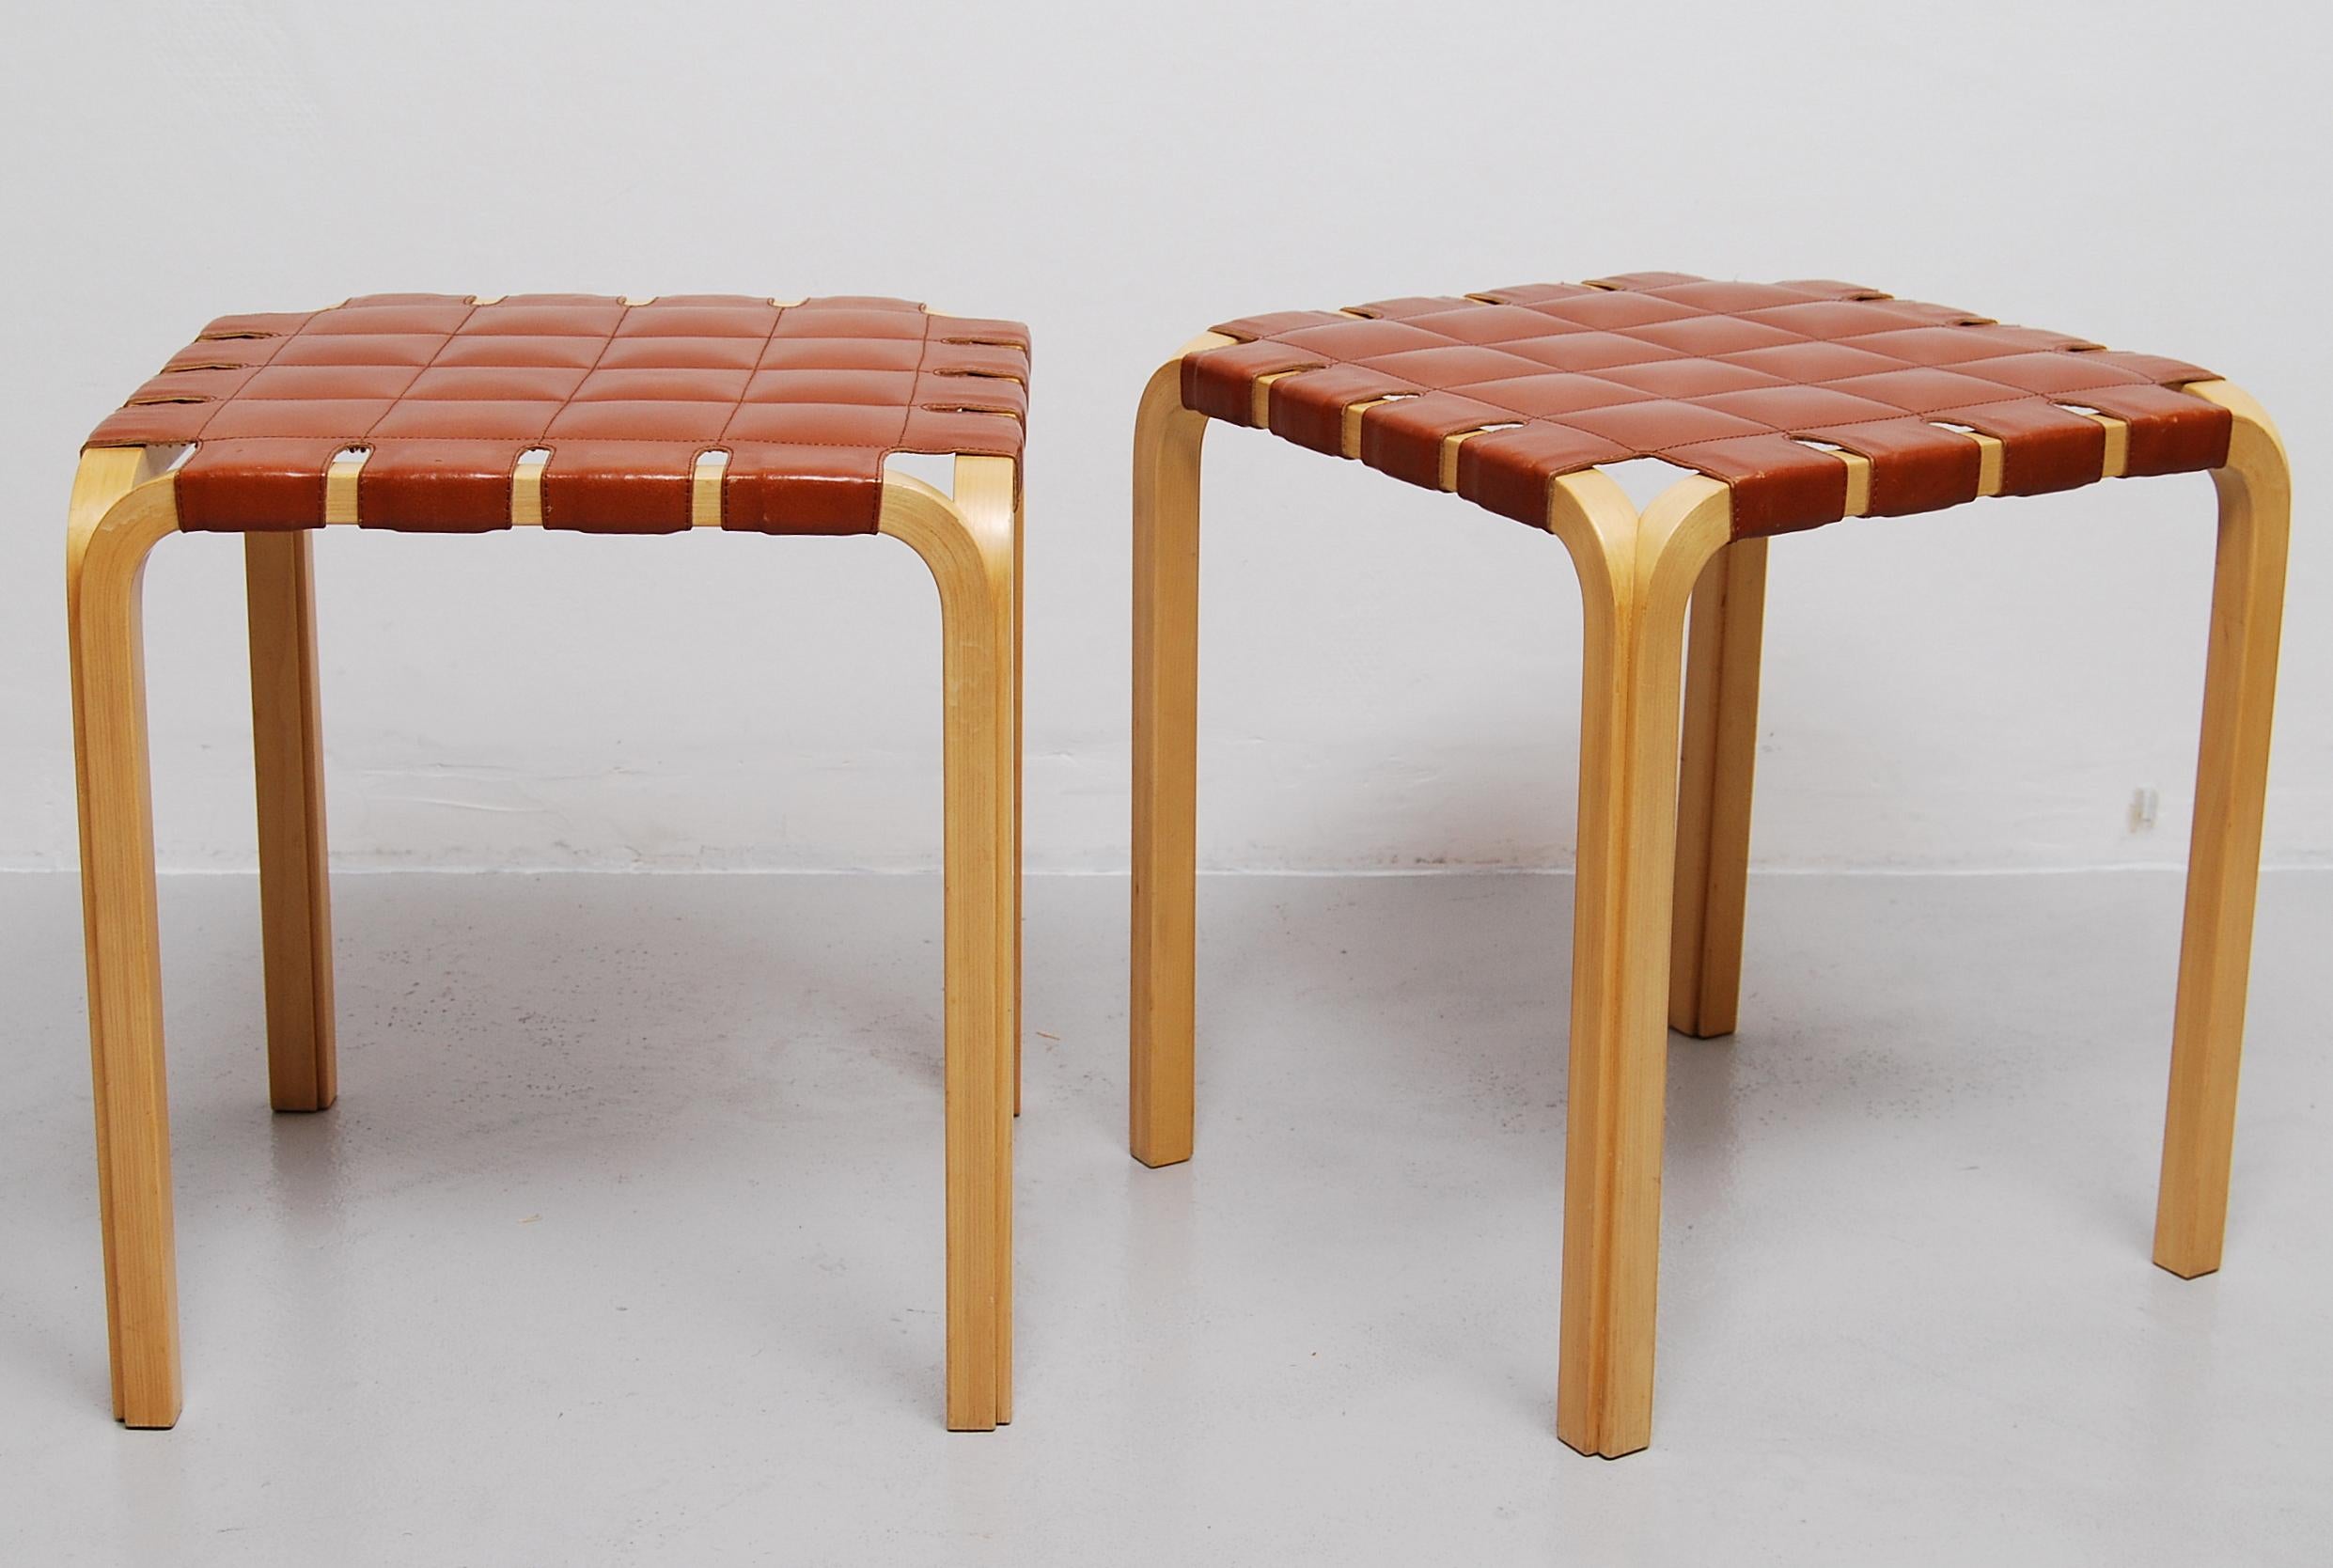 Designed in 1947, Alvar Aalto's Y61 stool required a special technique to create the unique birch Y-legs. This pair with original leather seats are in a wonderful condition.
Manufactured by Artek.
 